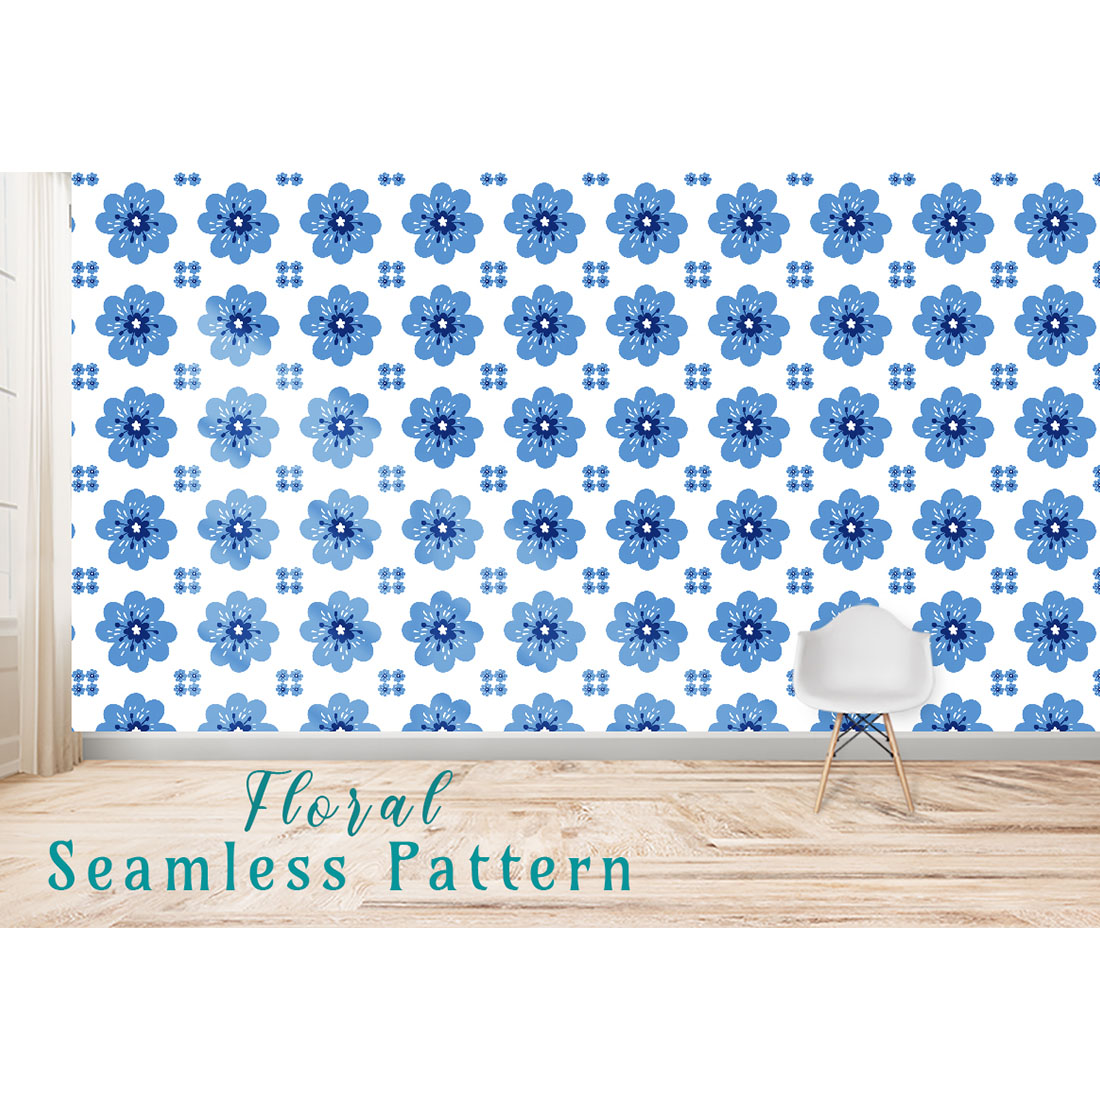 Image with enchanting patterns of blue flowers